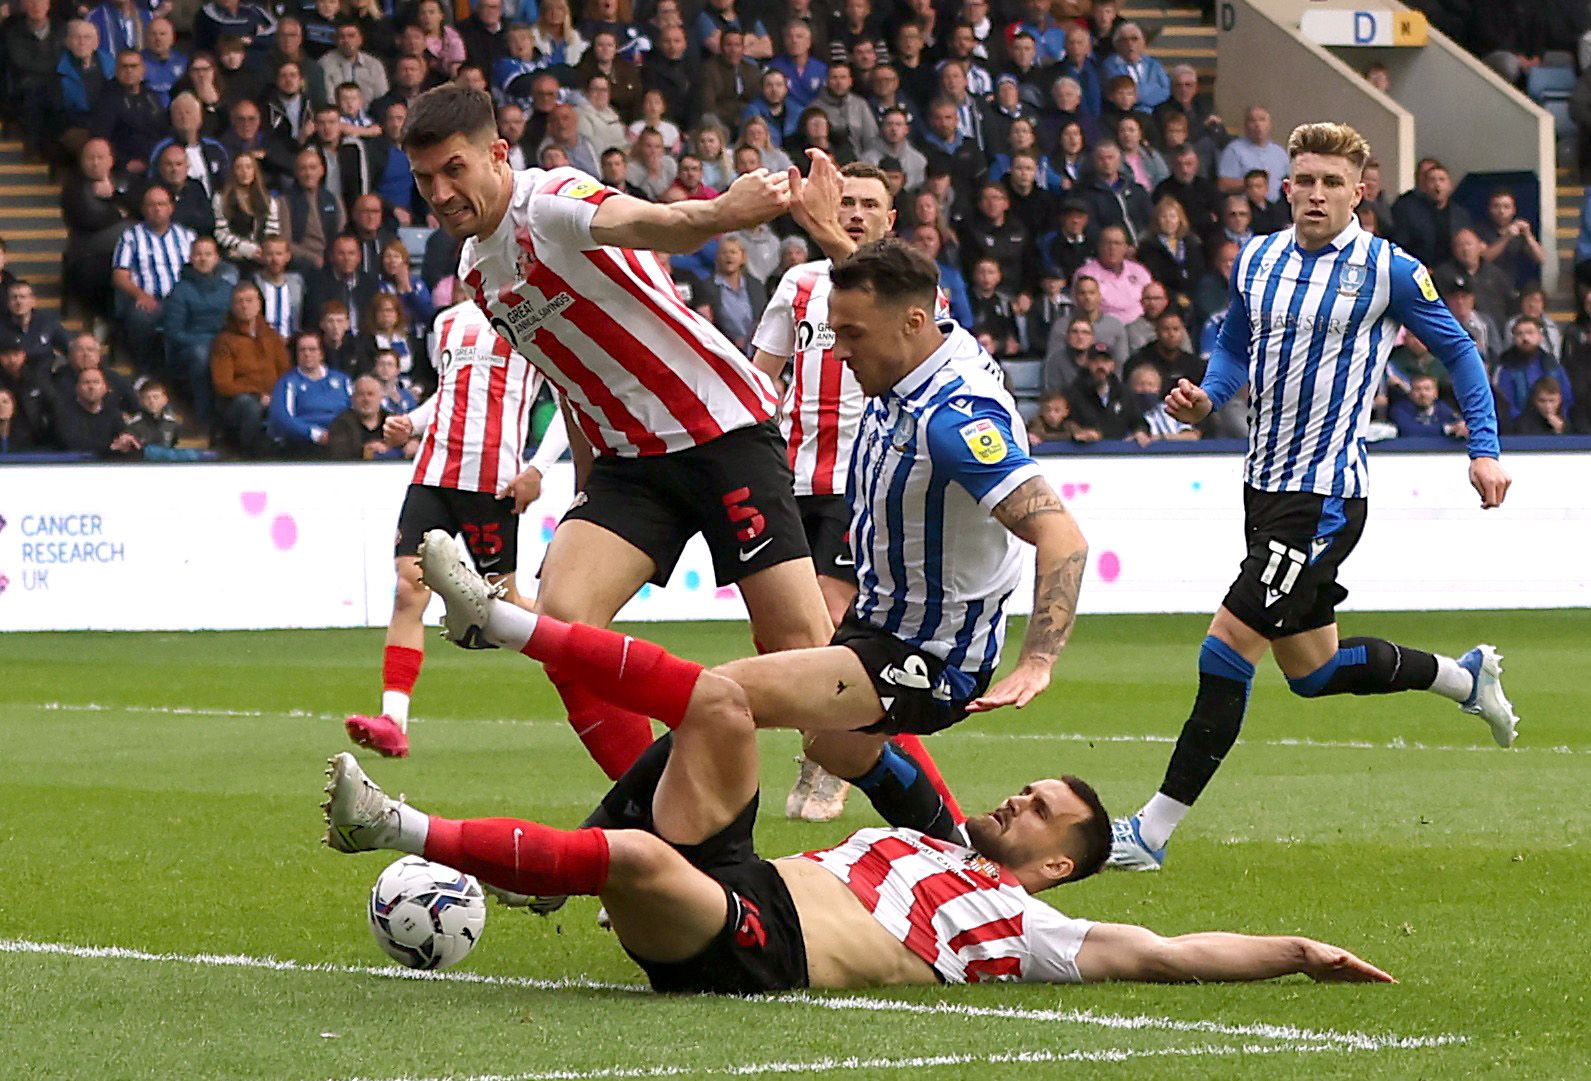 Soccer Football - League One - Play-Off Semi Final Second Leg - Sheffield Wednesday v Sunderland - Hillsborough Stadium, Sheffield, Britain - May 9, 2022 Sunderland's Danny Batth and Bailey Wright in action with Sheffield Wednesday's Lee Gregory Action Images/Lee Smith EDITORIAL USE ONLY. No use with unauthorized audio, video, data, fixture lists, club/league logos or 'live' services. Online in-match use limited to 75 images, no video emulation. No use in betting, games or single club /league/pl